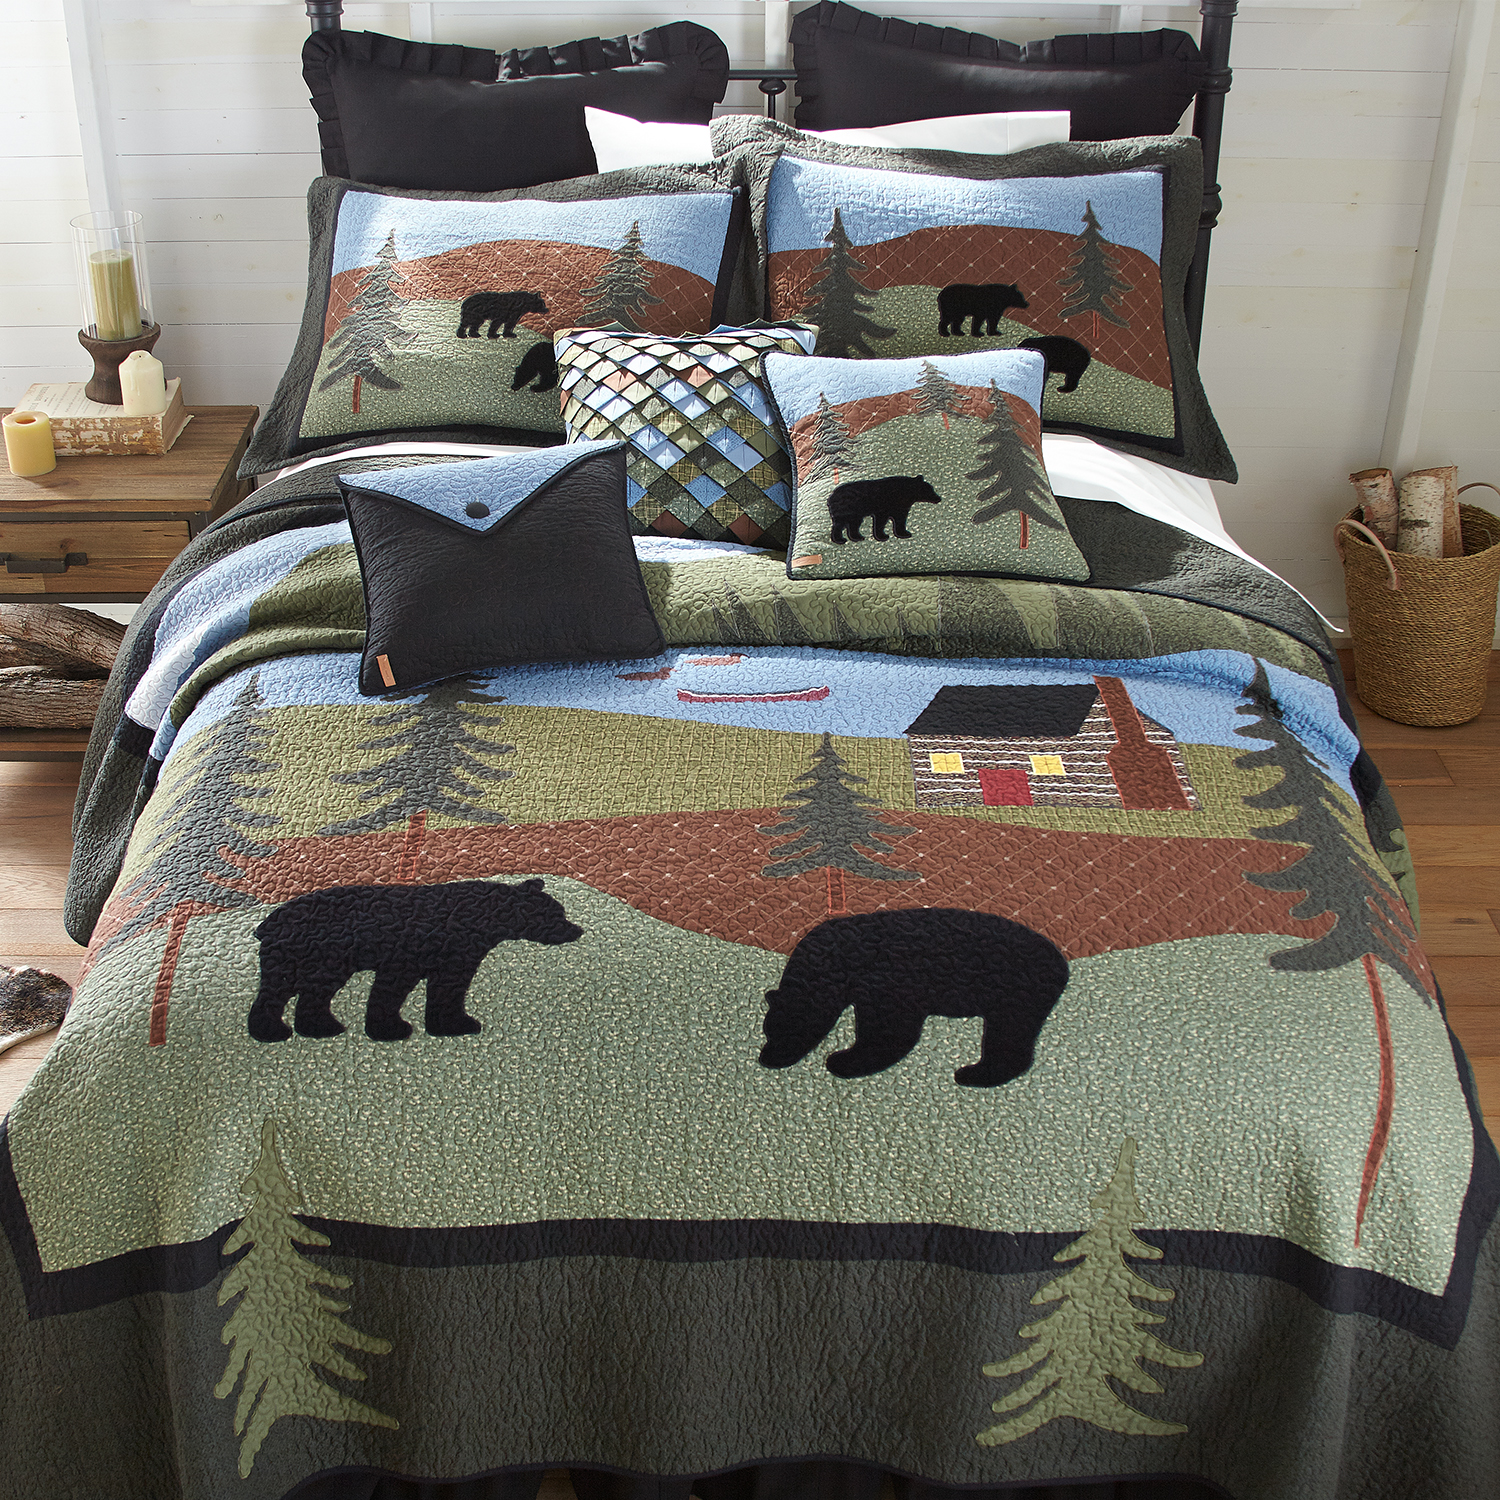 Bear Lake Cotton King Quilt by Donna Sharp - Lodge Quilt with Bear Pattern - King - Machine Washable - image 2 of 3